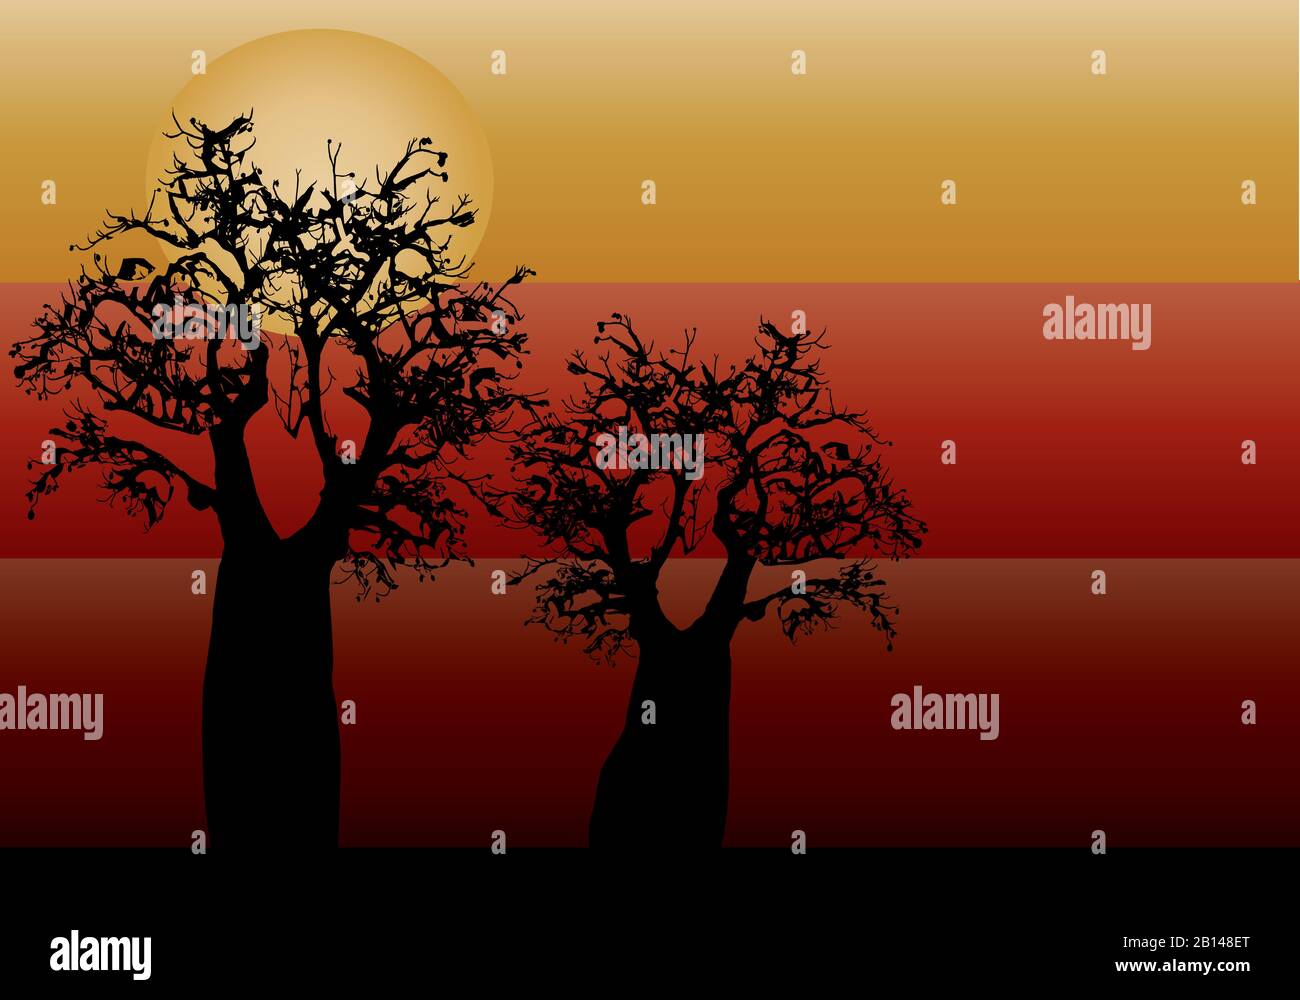 Boab tree with three different colors in the background of red yellow and orange Stock Photo